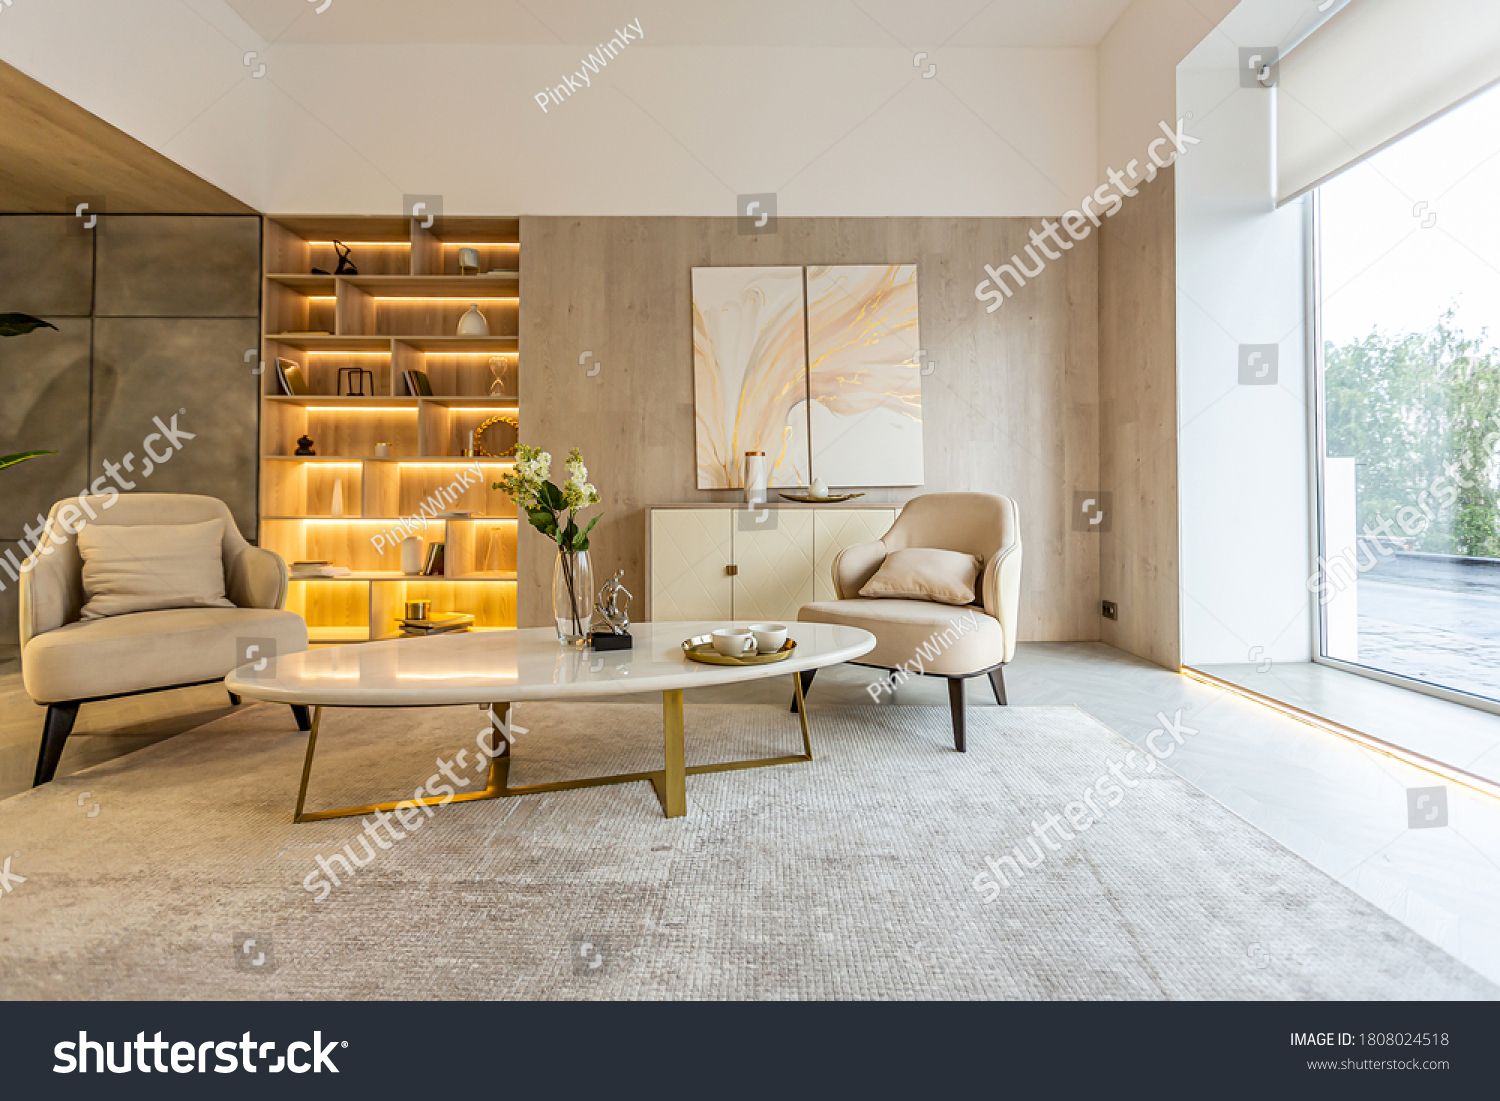 modern interior design of the living area in the studio apartment in warm soft colors. decorative built-in lighting and soft beige furniture #1808024518